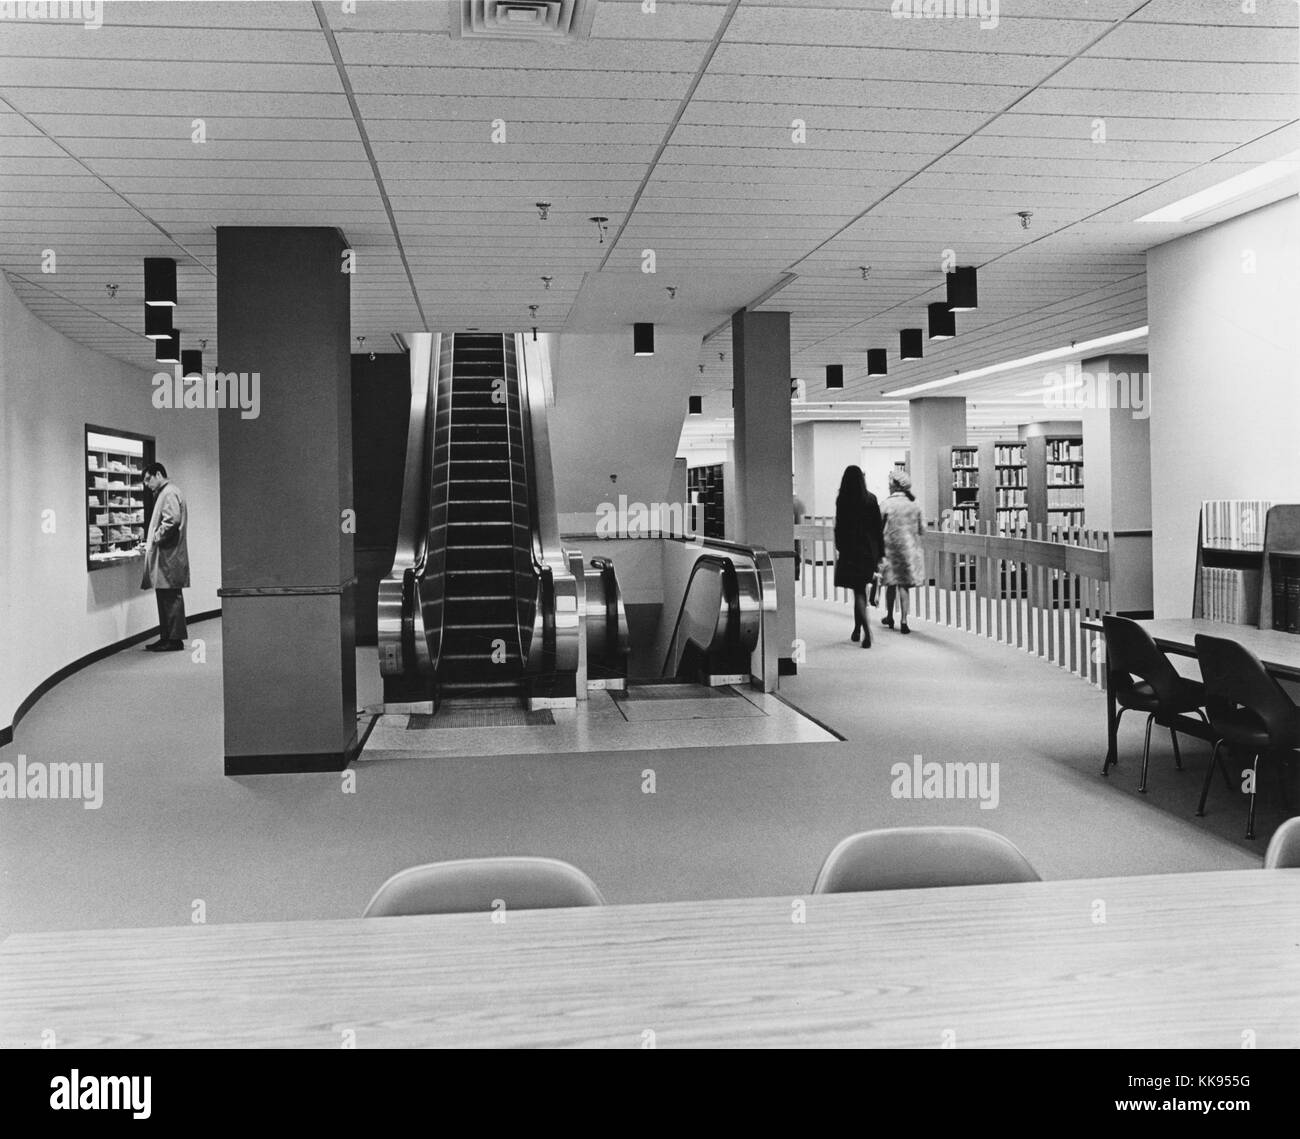 Black and white photograph of an escalator at a library, rows of shelves with books, and people walking can be seen in the background, New York City, New York, 1970. From the New York Public Library. Stock Photo